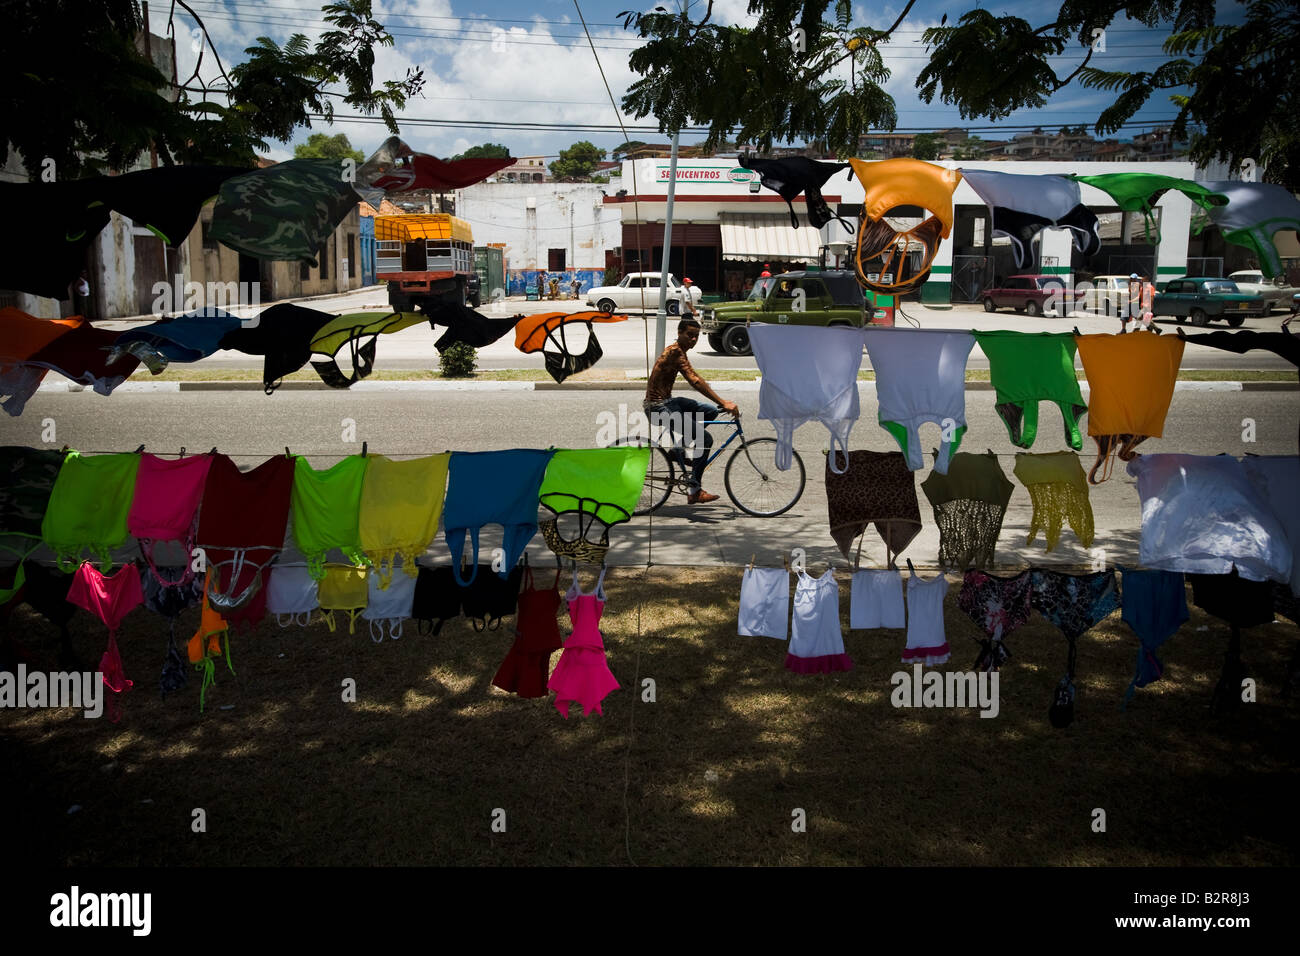 A boy rides a bicycle past women's clothes hanging on lines as they are offered for sale in Santiago, Cuba Stock Photo